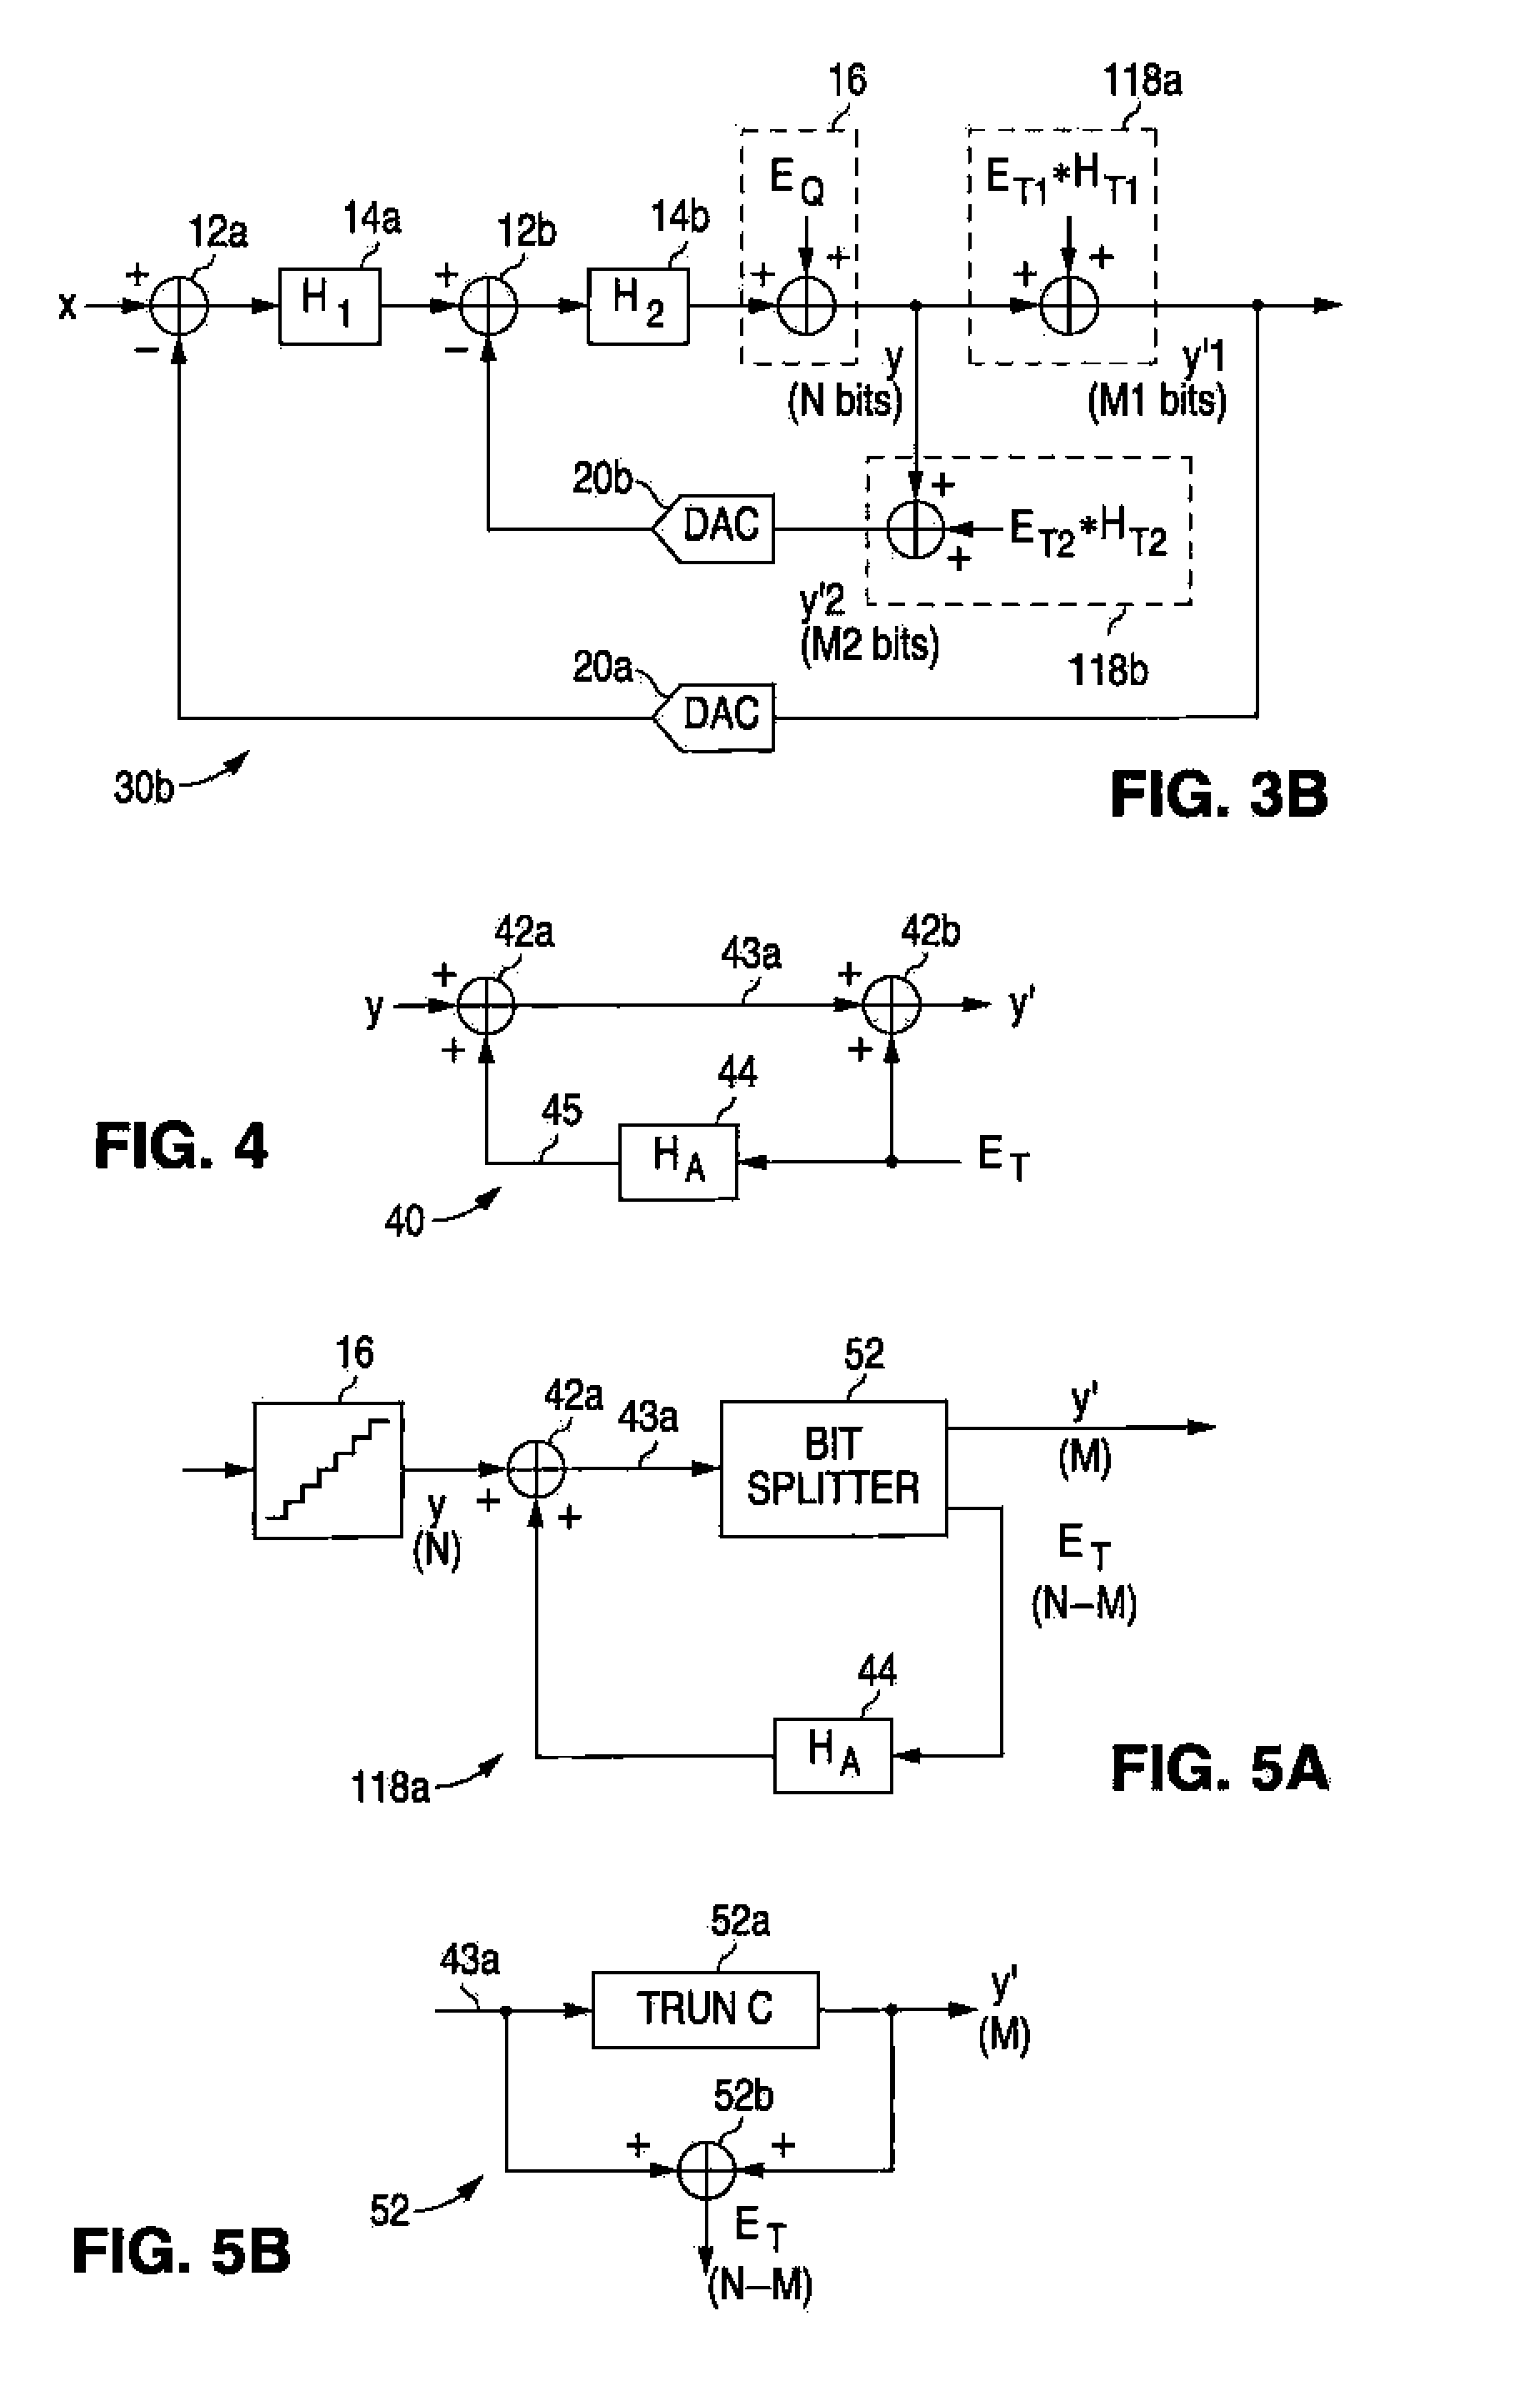 Sigma-delta modulator with DAC resolution less than ADC resolution and increased dynamic range